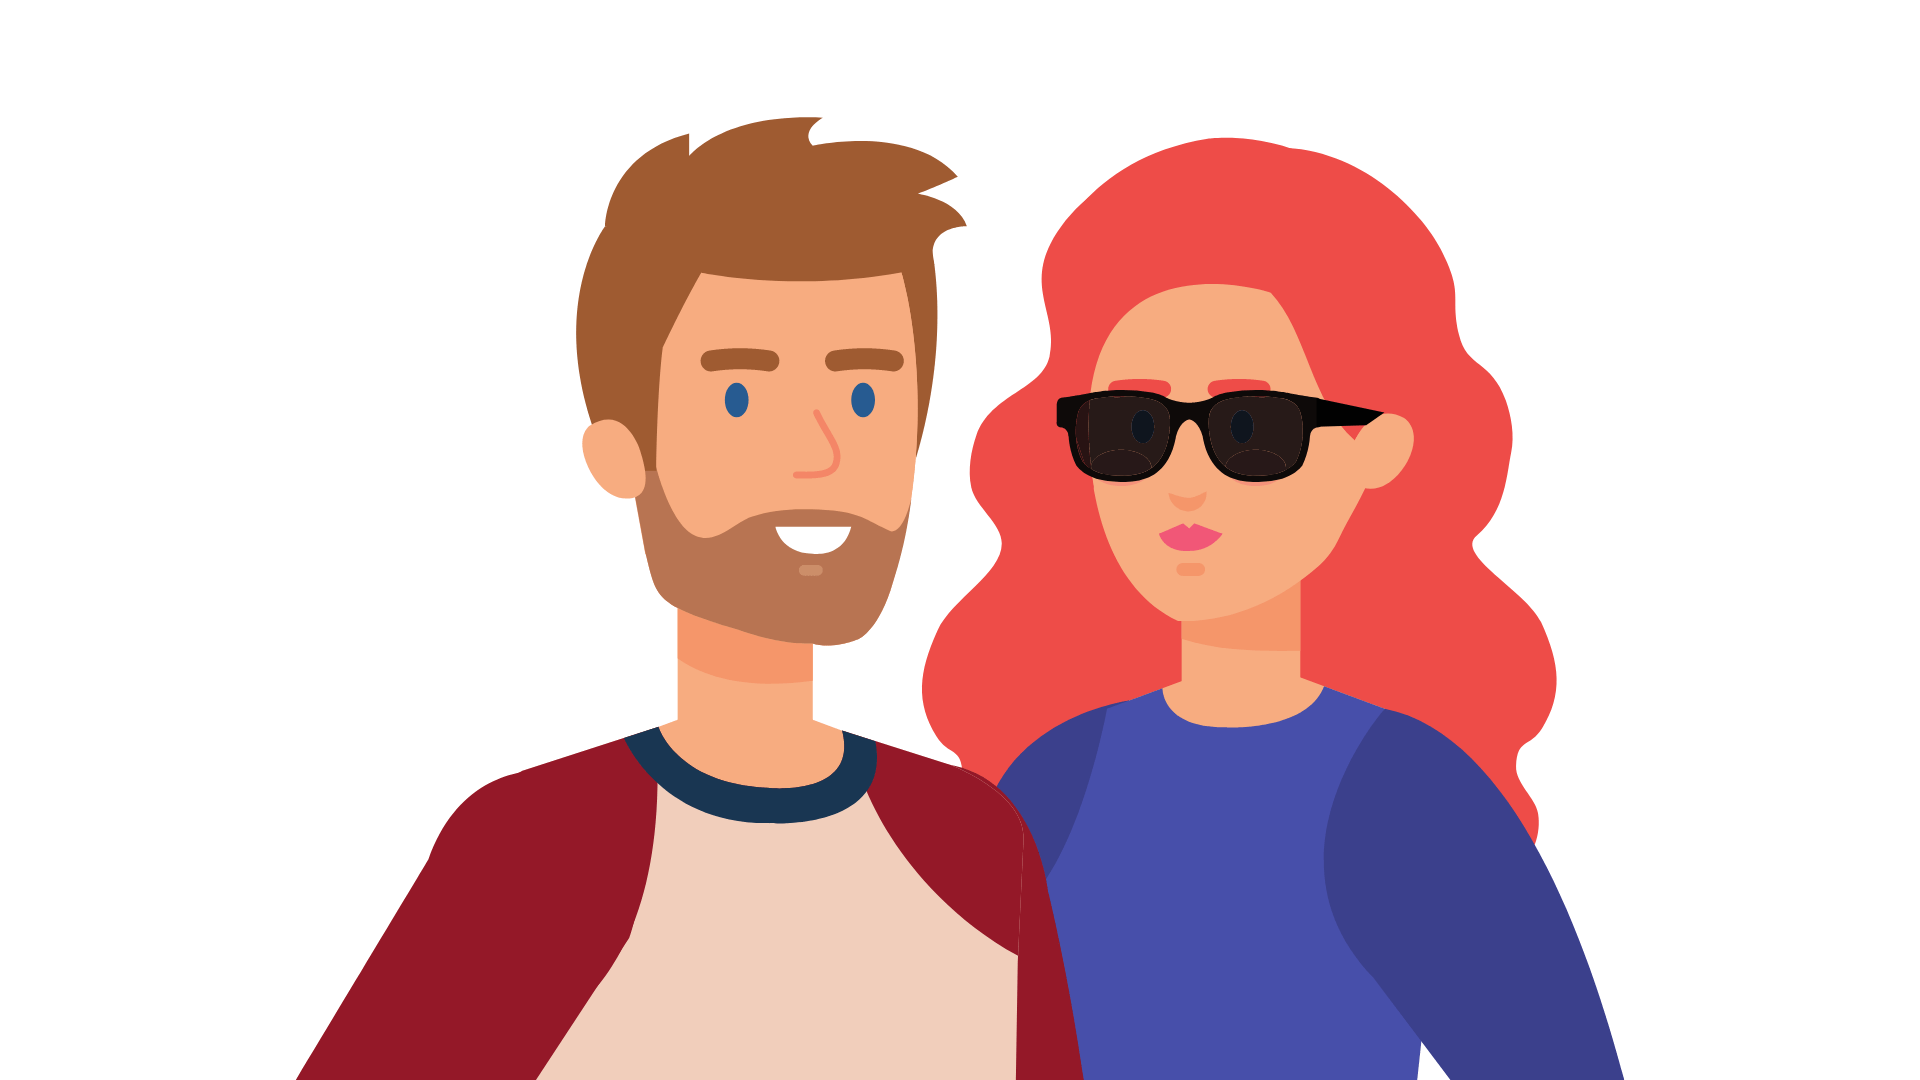 graphic of two young people, one of whom - the female - is wearing dark glasses.